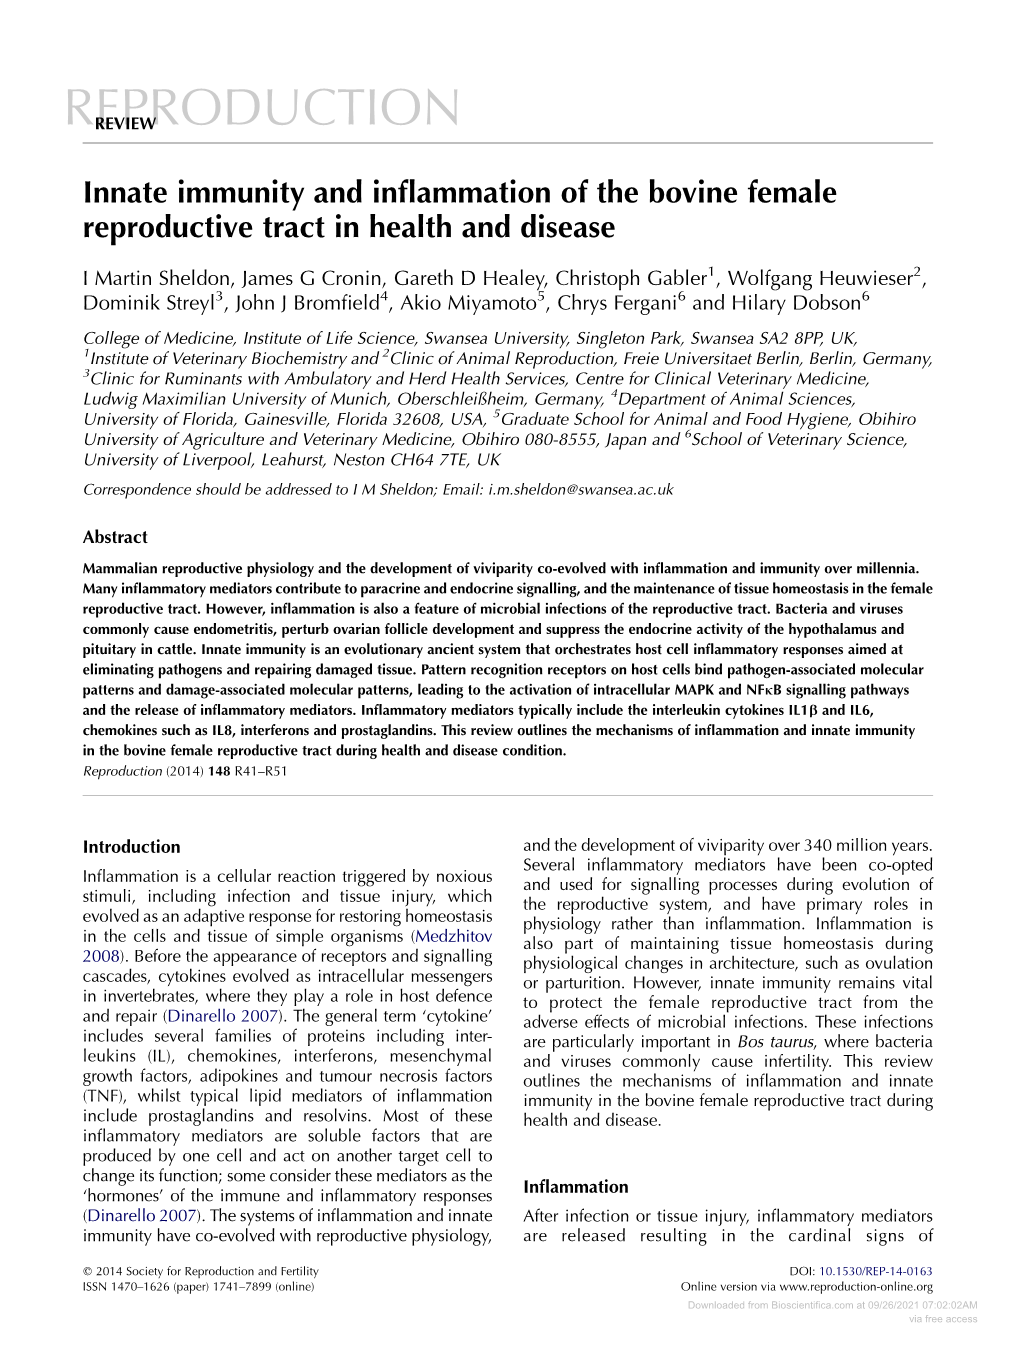 Innate Immunity and Inflammation of the Bovine Female Reproductive Tract